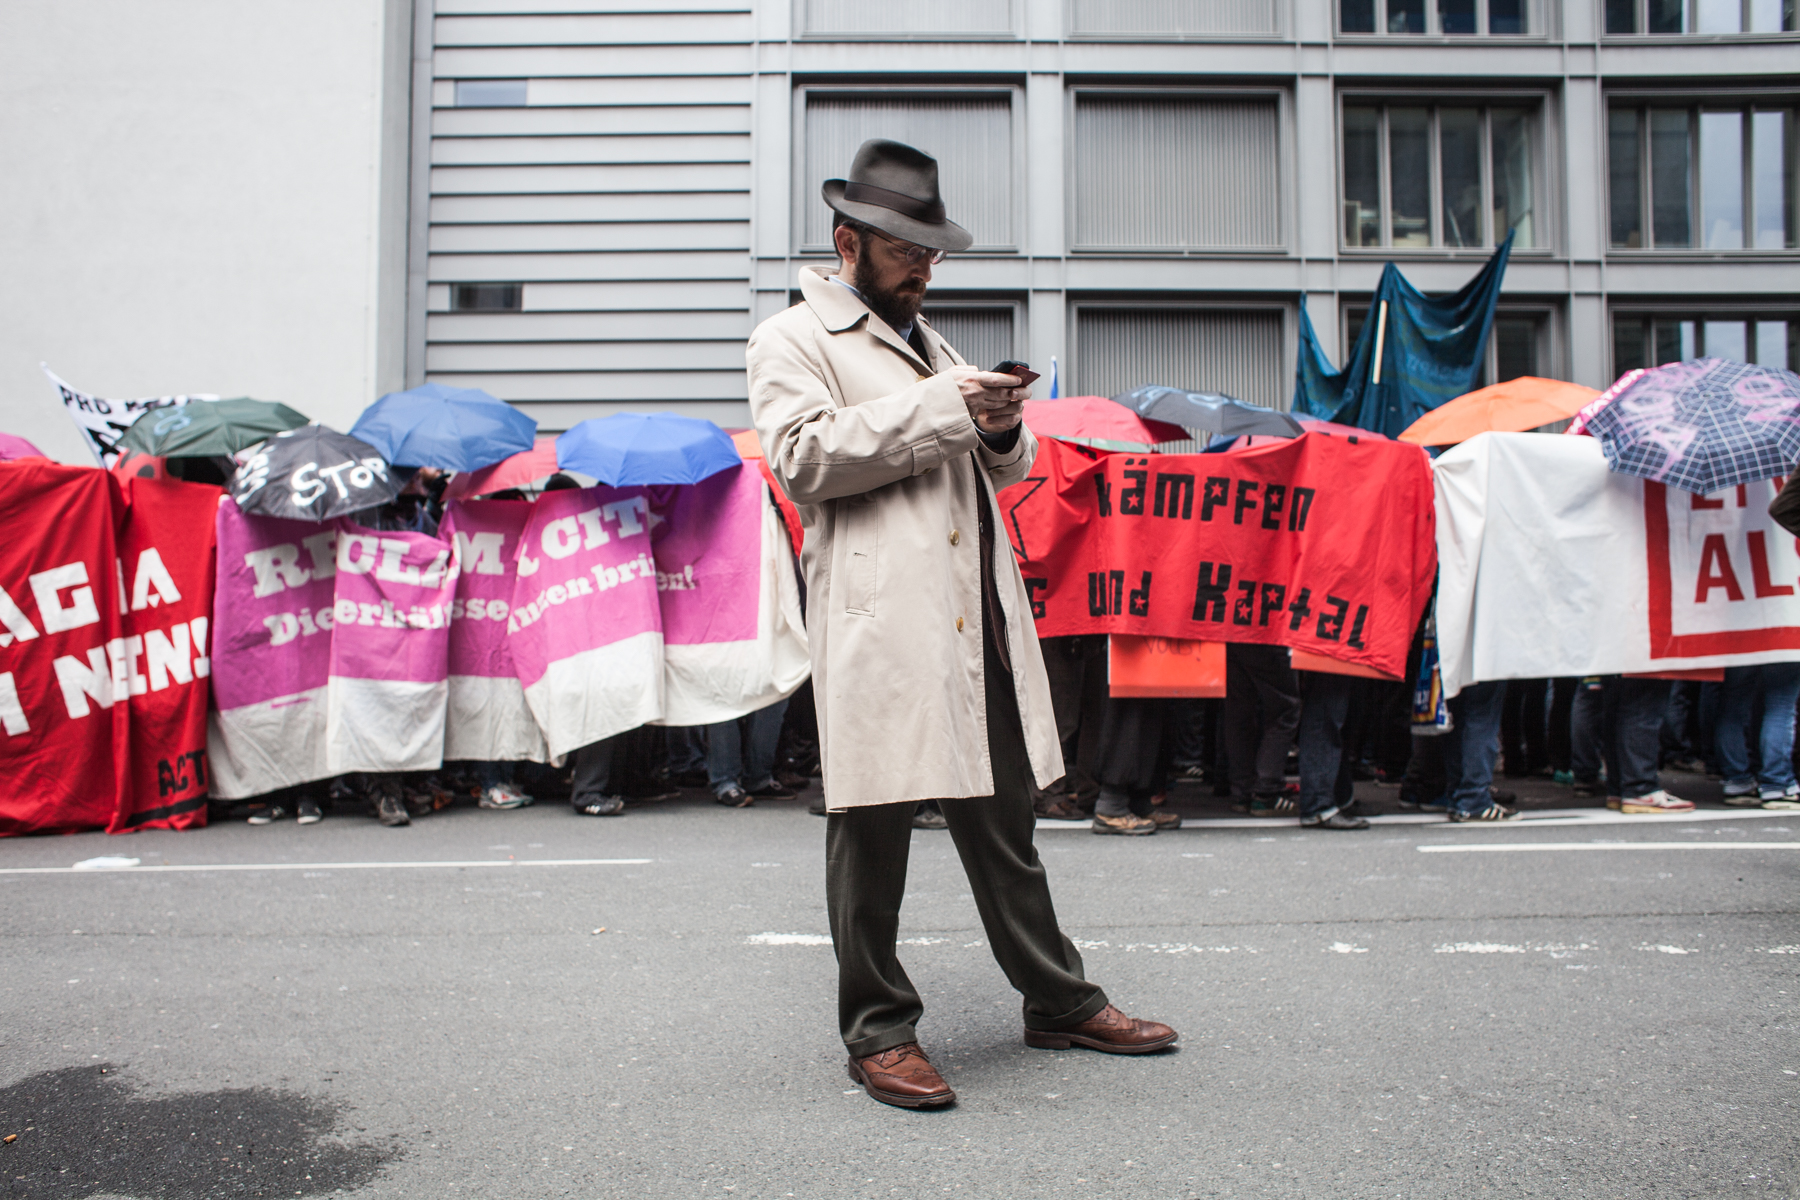 A man dressed with a trench coat is standing in front of a row of demonstrating people during the Blockupy protests in March 2013 in Frankfurt